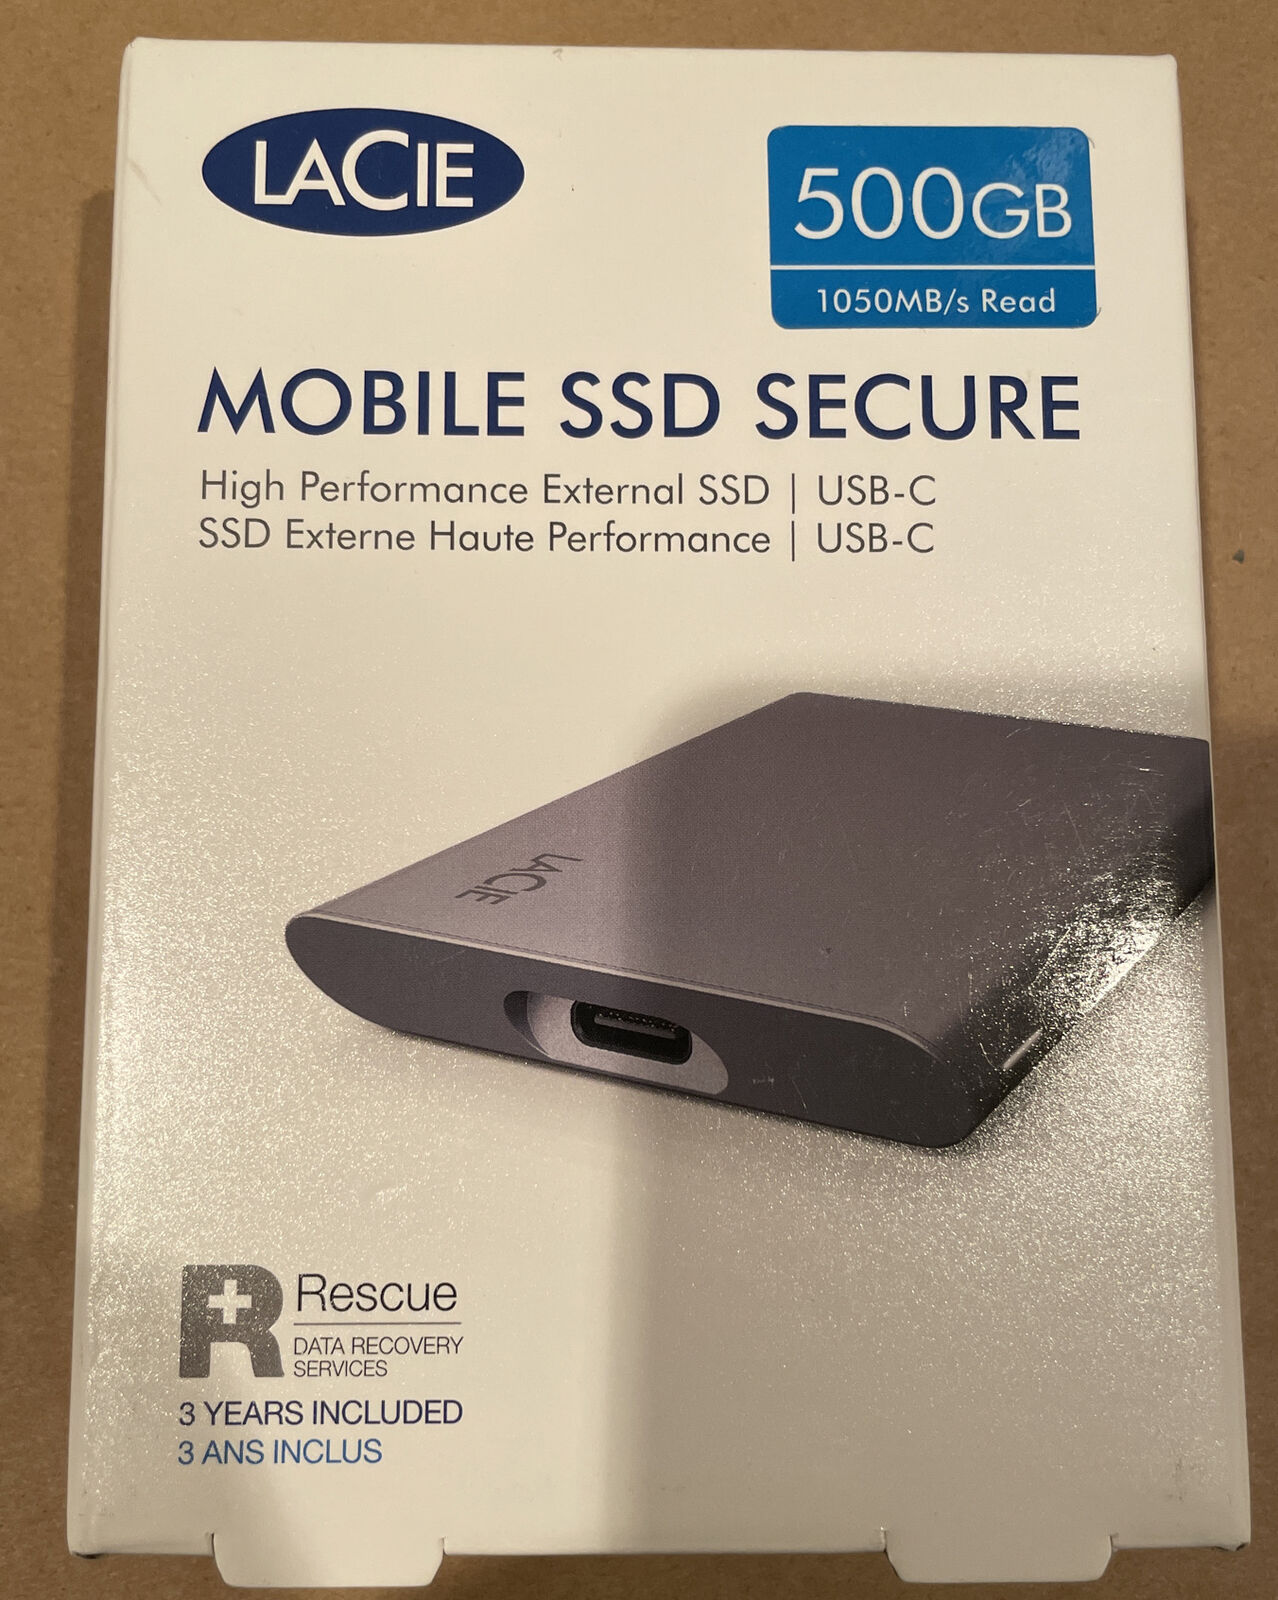 LaCie Mobile SSD 500GB High Performance External SSD NEW SEALED